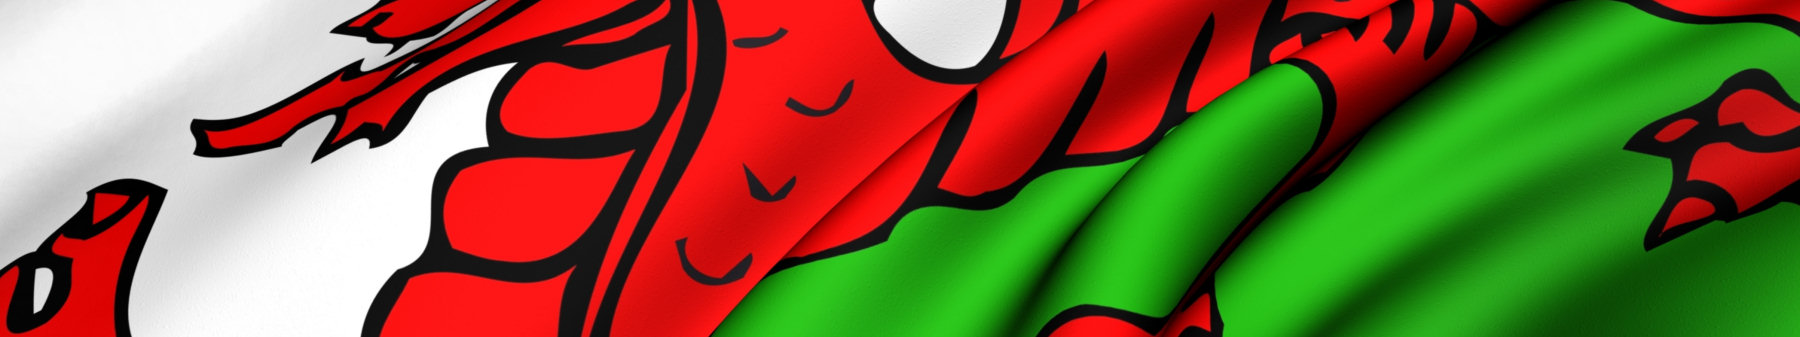 Welsh dragon flag - virtual addresses in Wales